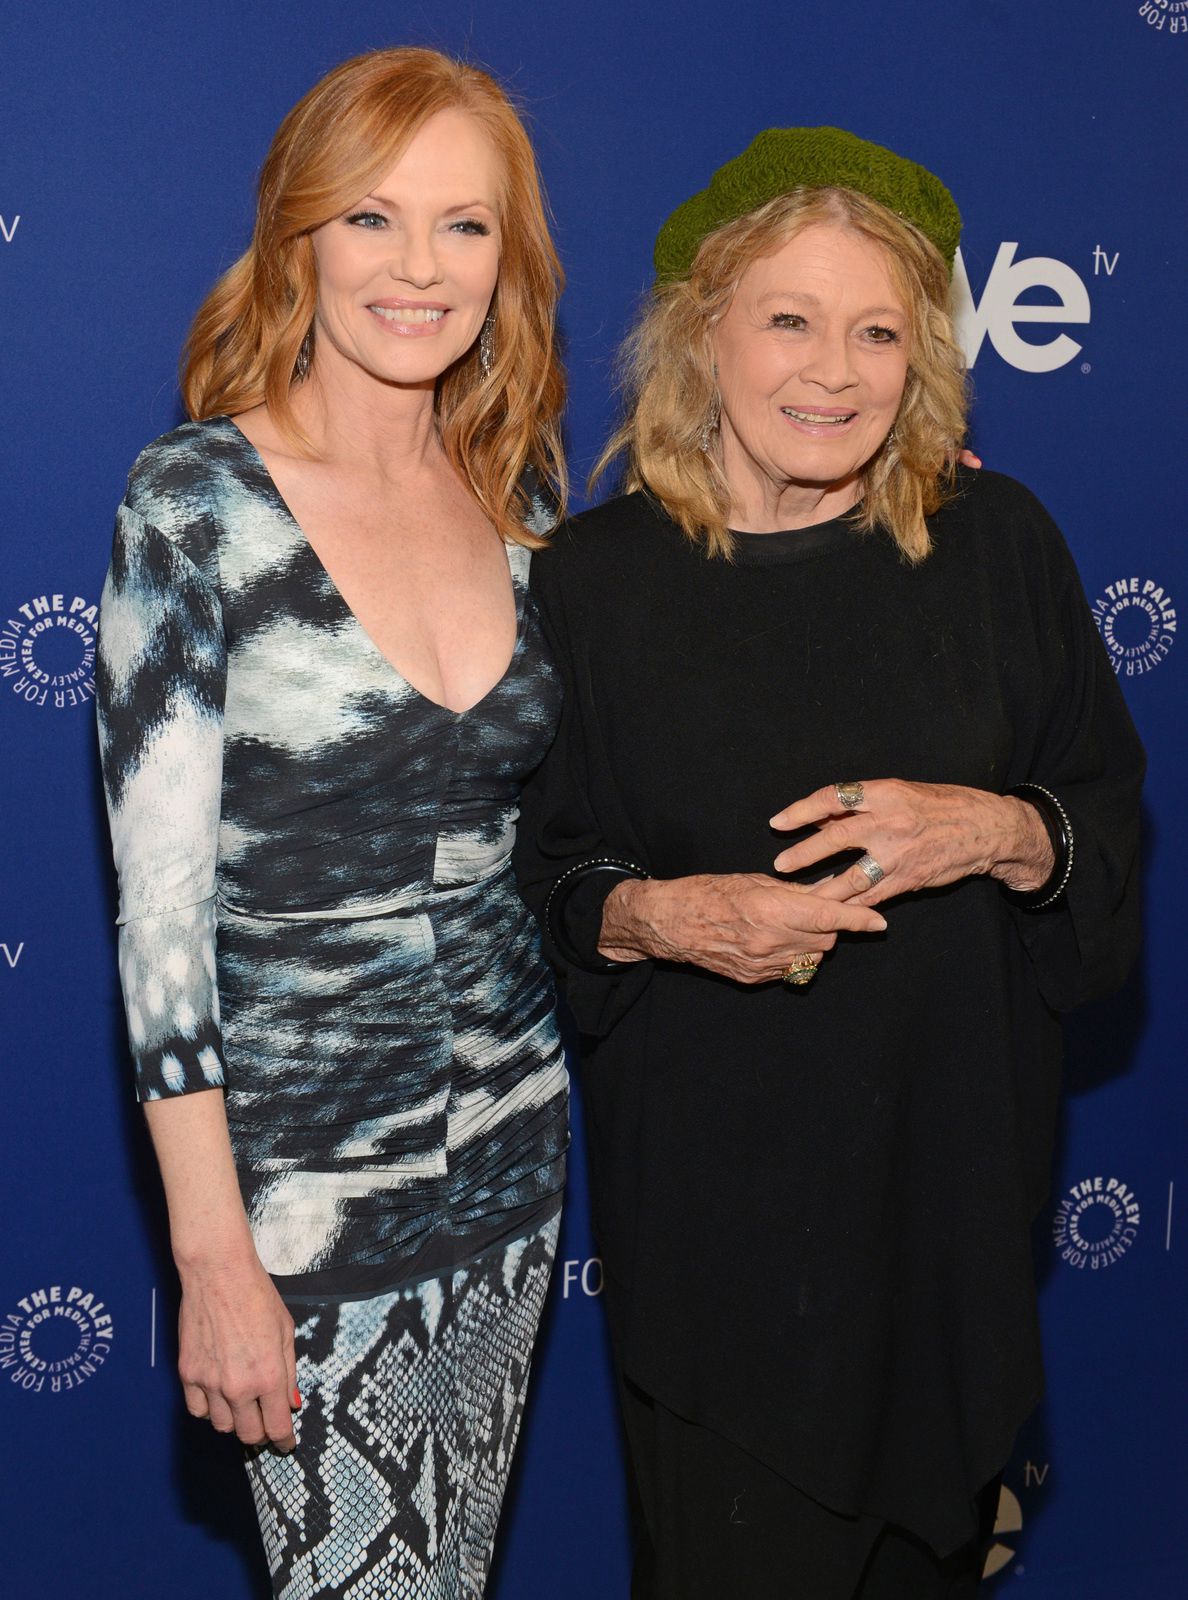 © Kevin Parry for The Paley Center for Media